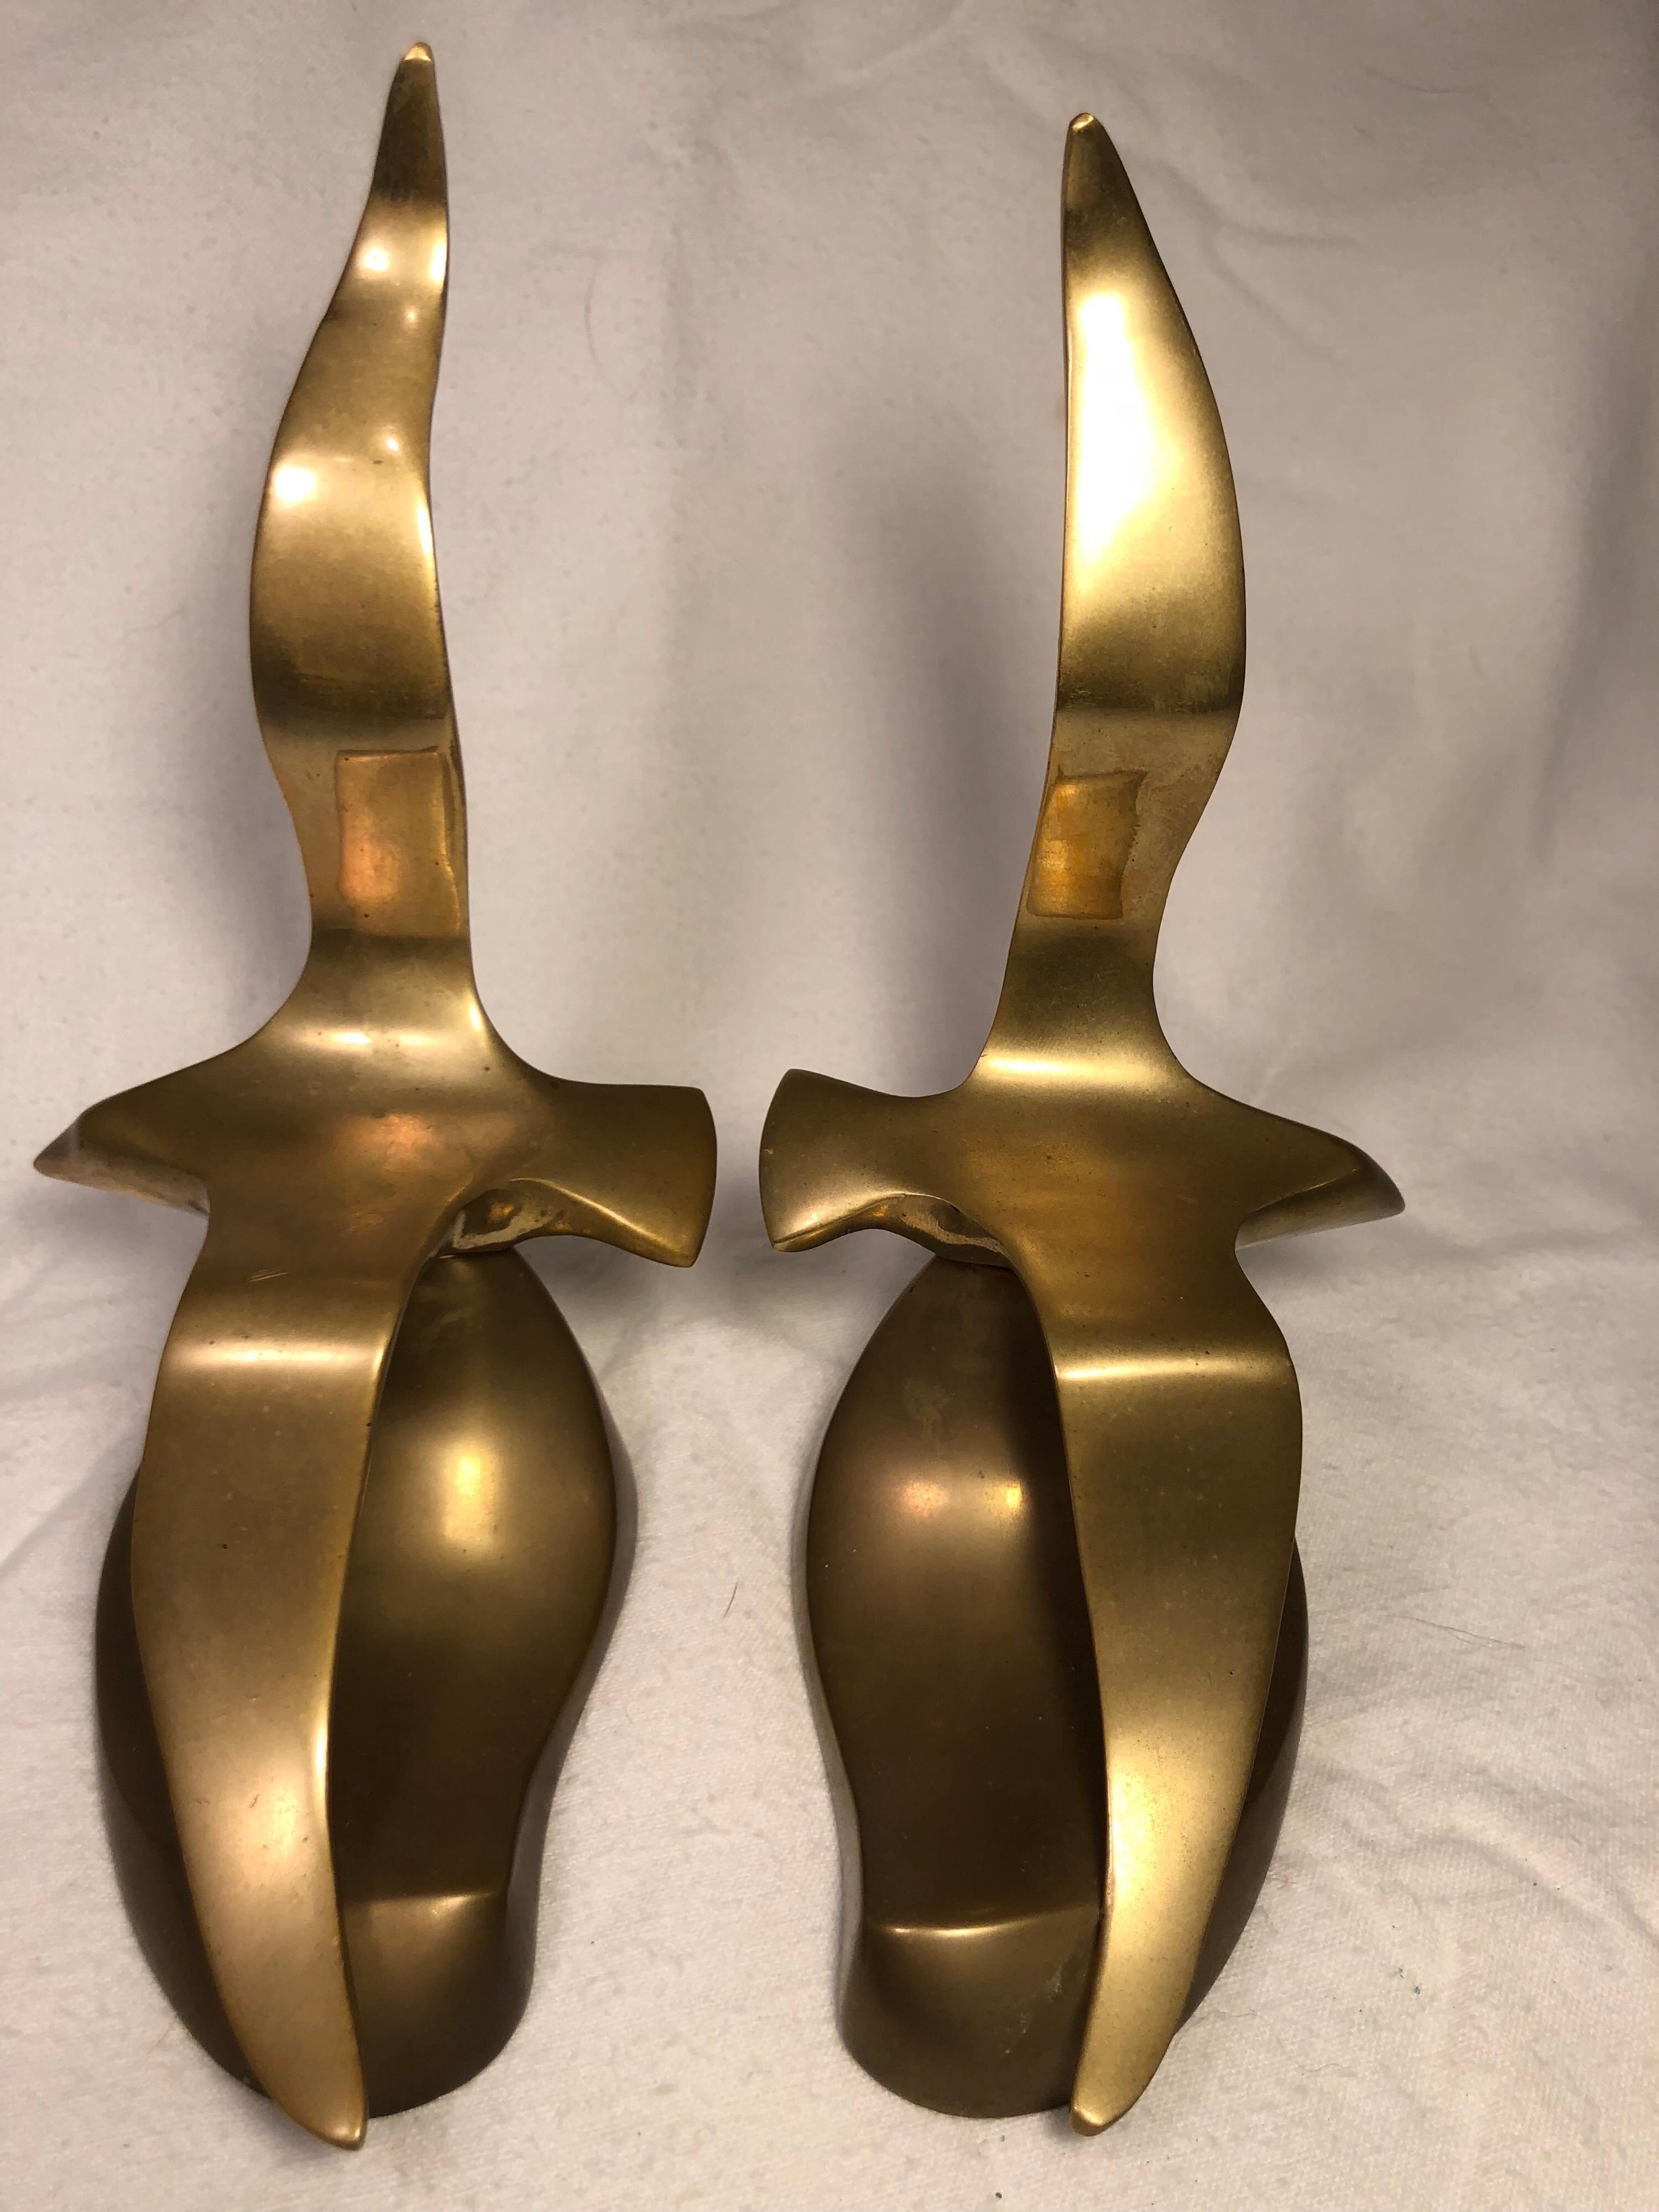 Pair of Mid-Century Modern Brass Seagull Bookends 1